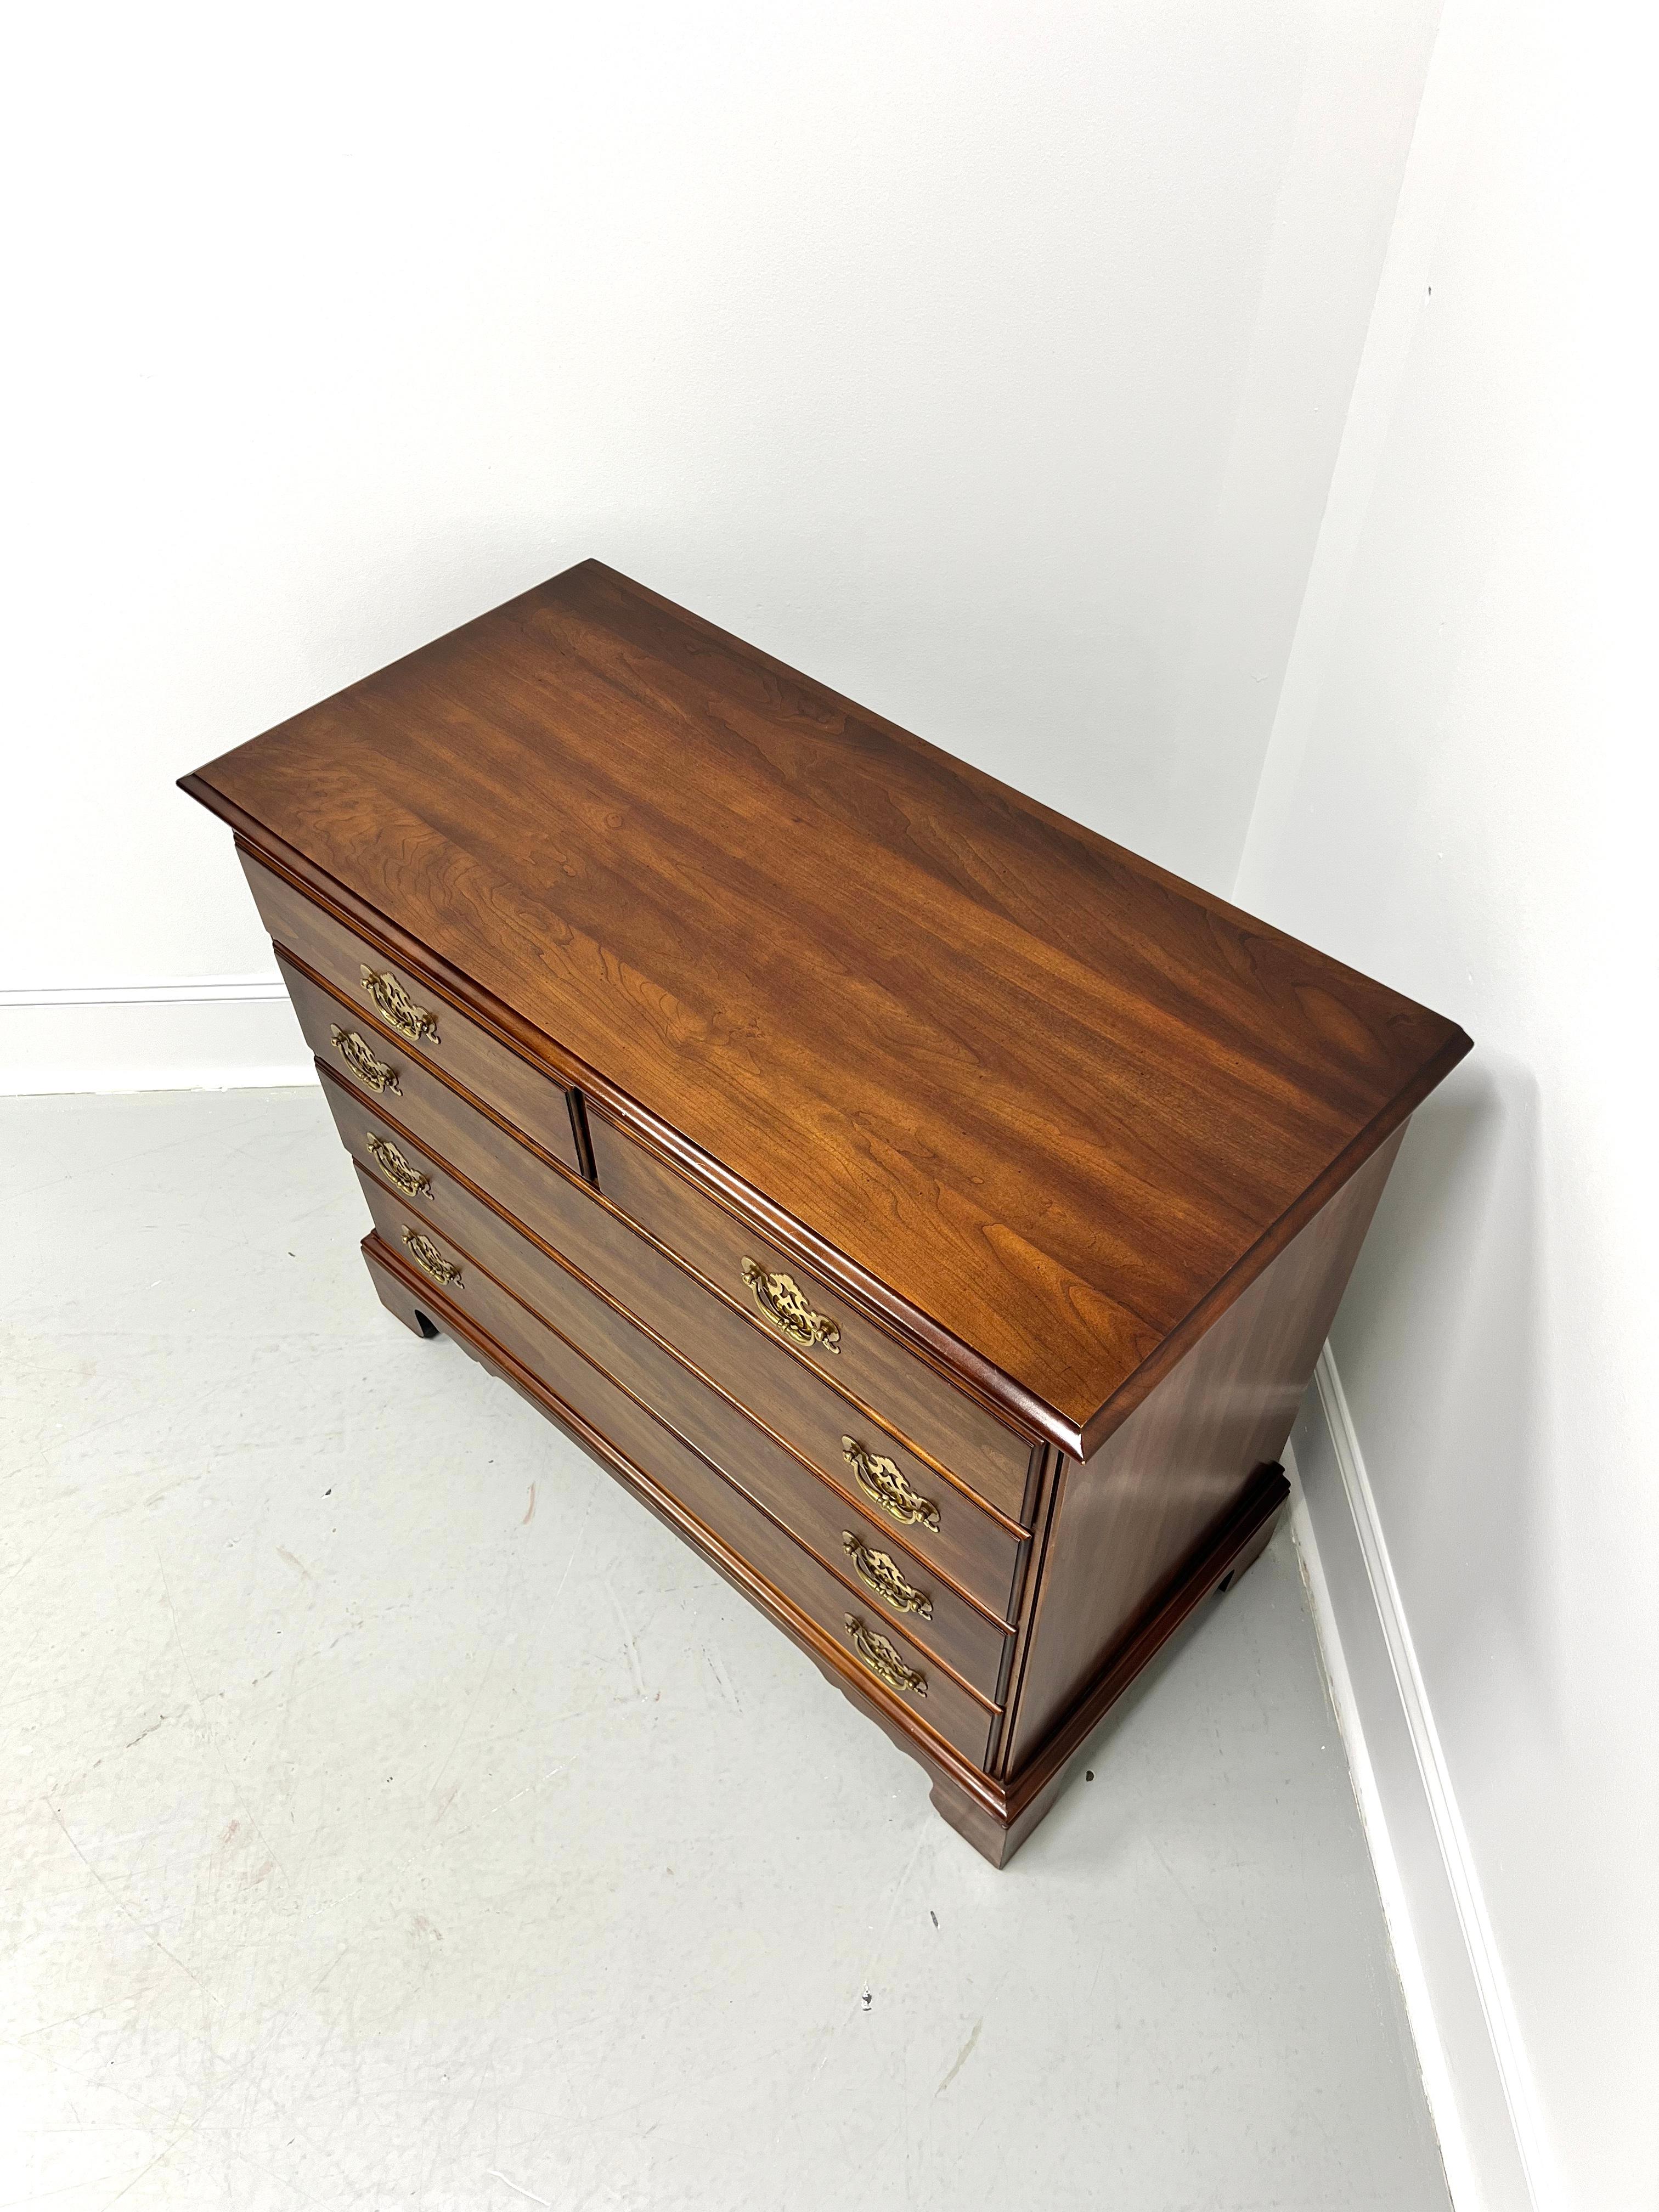 STATTON Trutype Americana Oxford Cherry Chippendale Bachelor Chest In Good Condition For Sale In Charlotte, NC